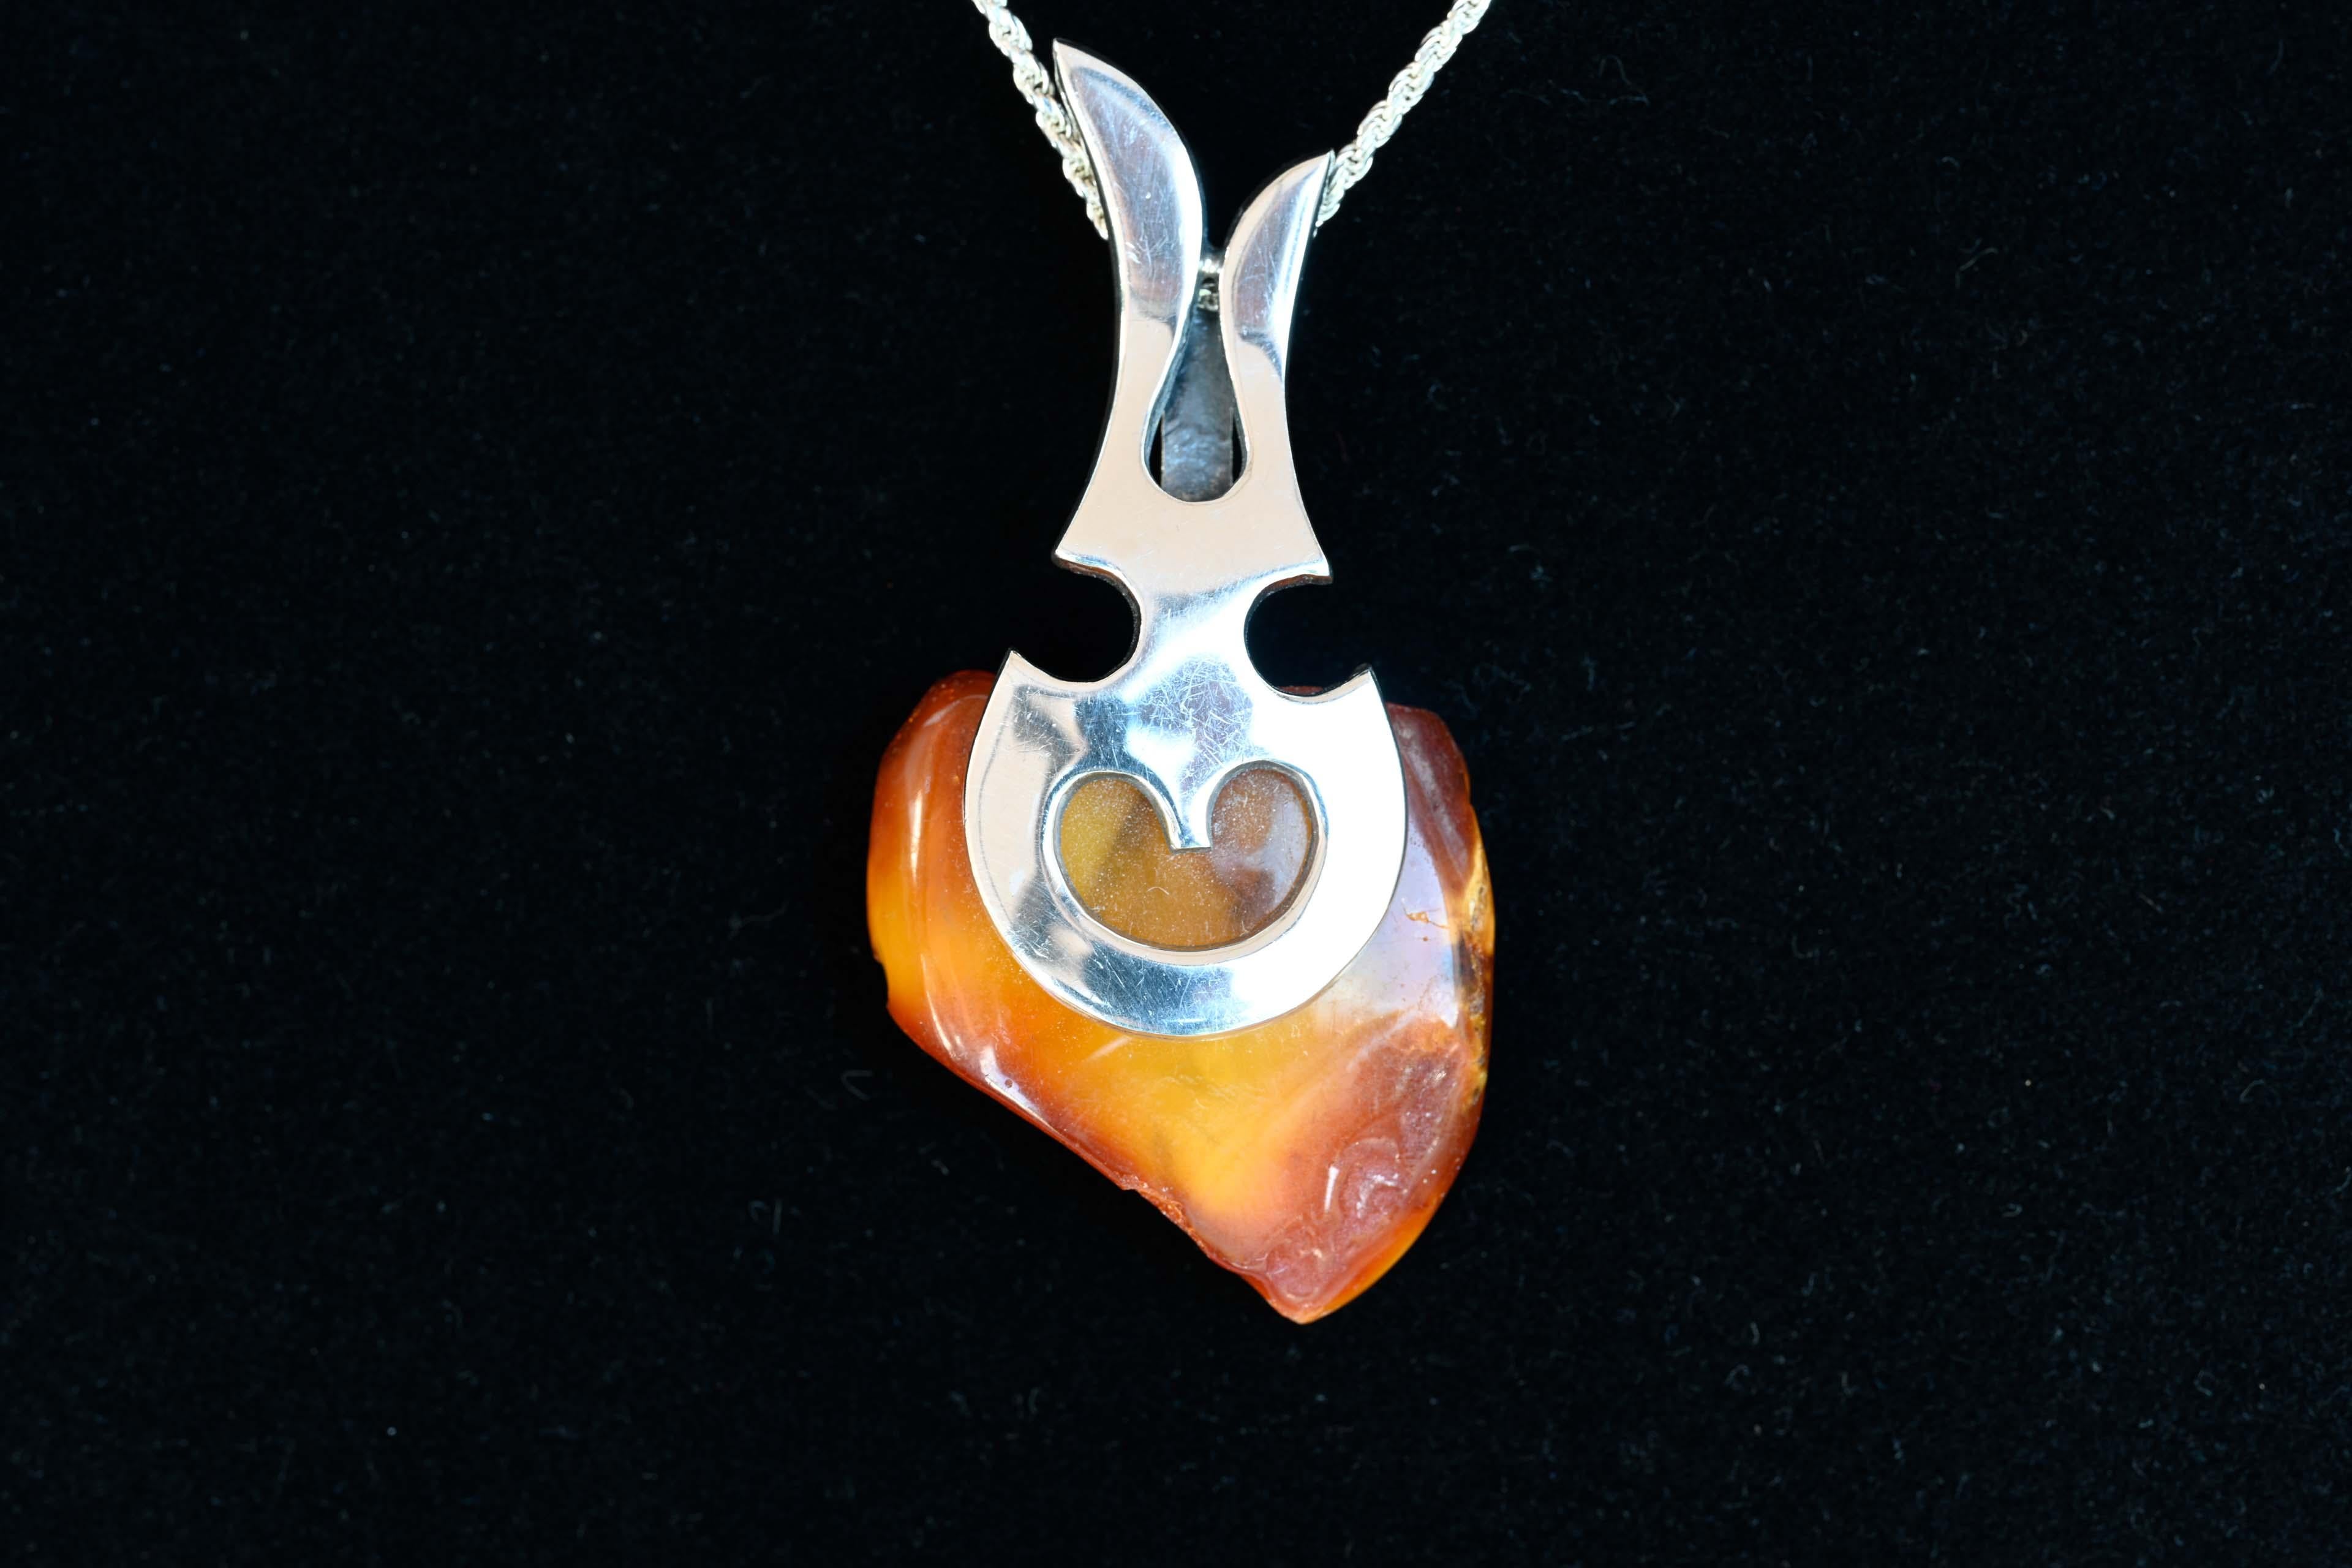 Modern 925 silver and baltic amber chain pendant. The chain is stamped 925 Italy. The chain measures 16 inches and the pendant measures 2 3/4 inches long. In good condition. 